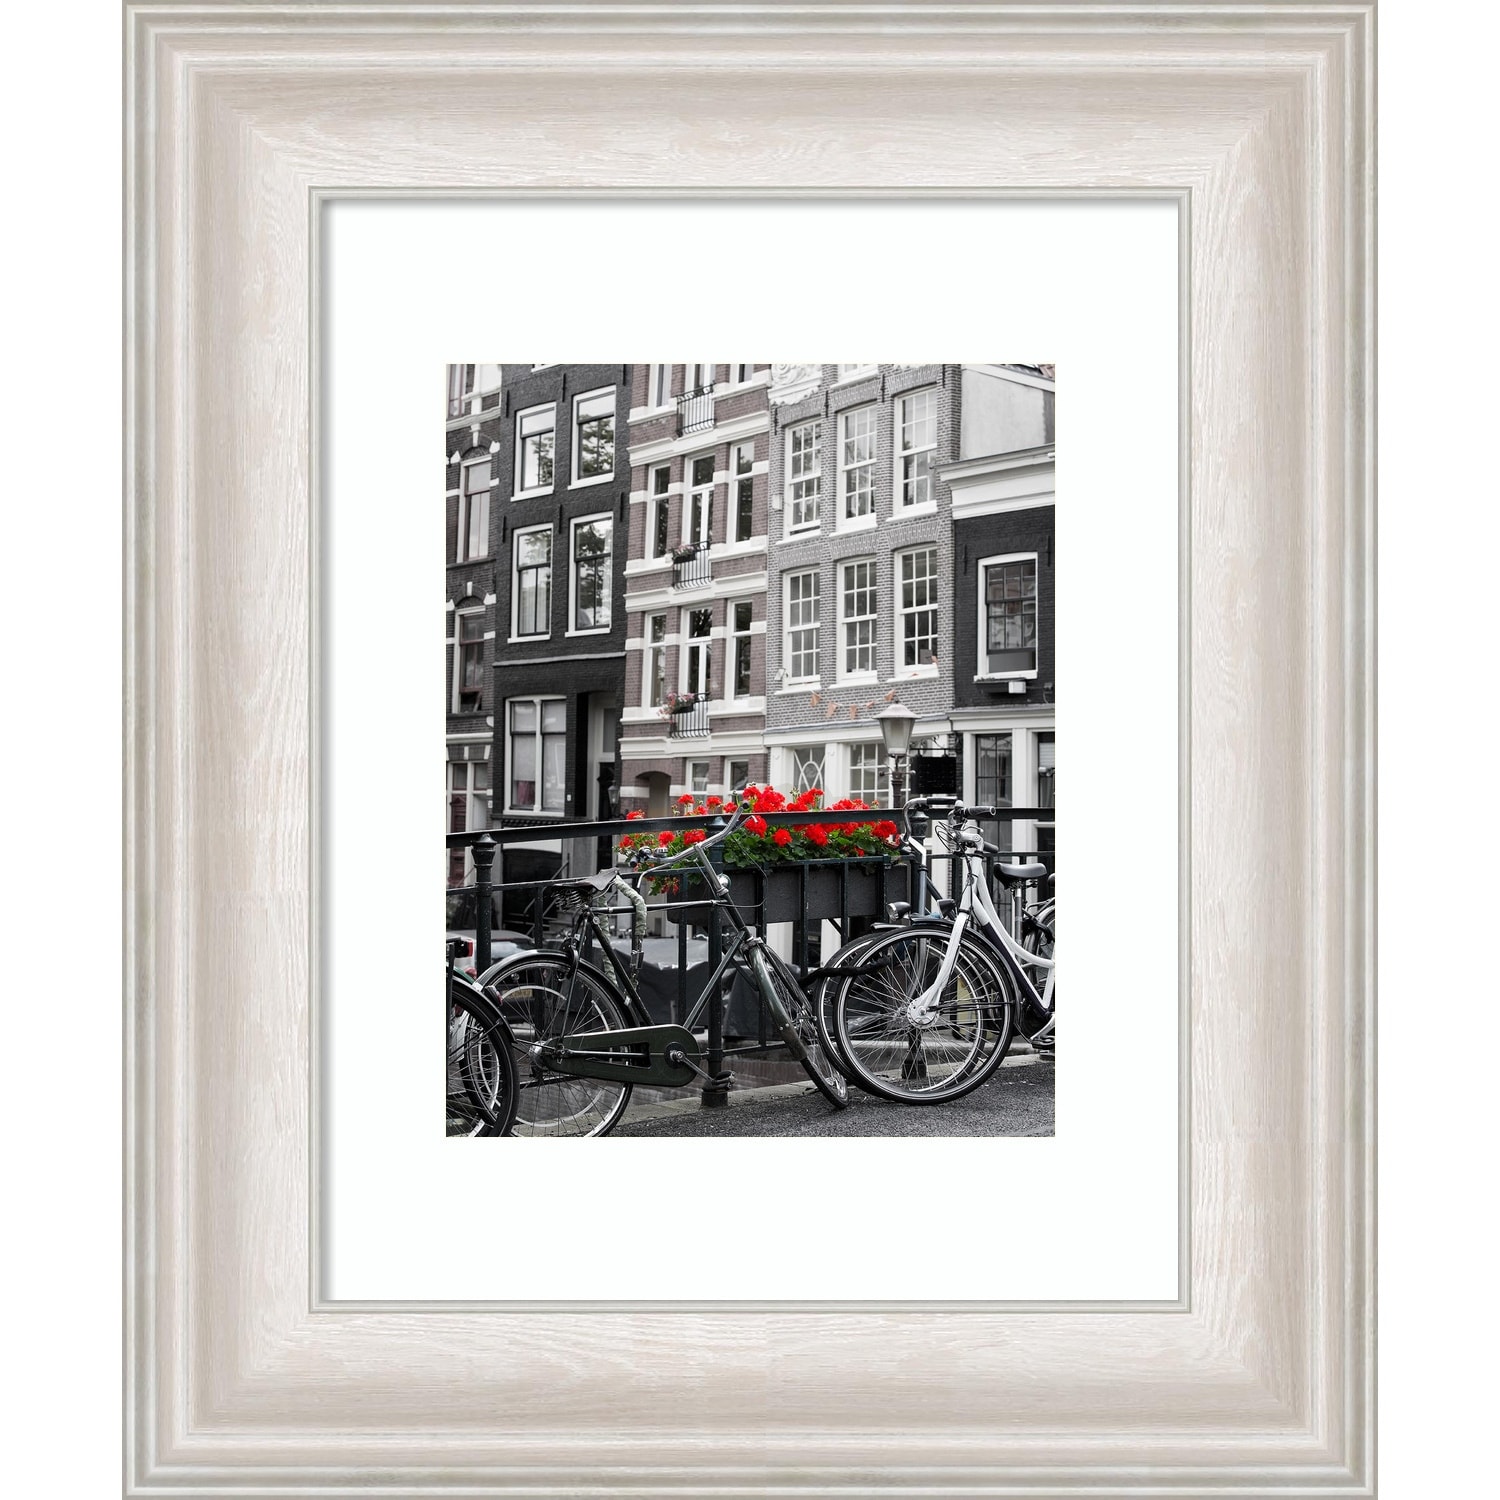 https://ak1.ostkcdn.com/images/products/is/images/direct/a52d04271cc36b42b6123a05a6fee6c62830ed14/Amanti-Art-Trio-White-Wash-Silver-Picture-Frame%2C-Photo-Frame%2C-Art-Frame.jpg